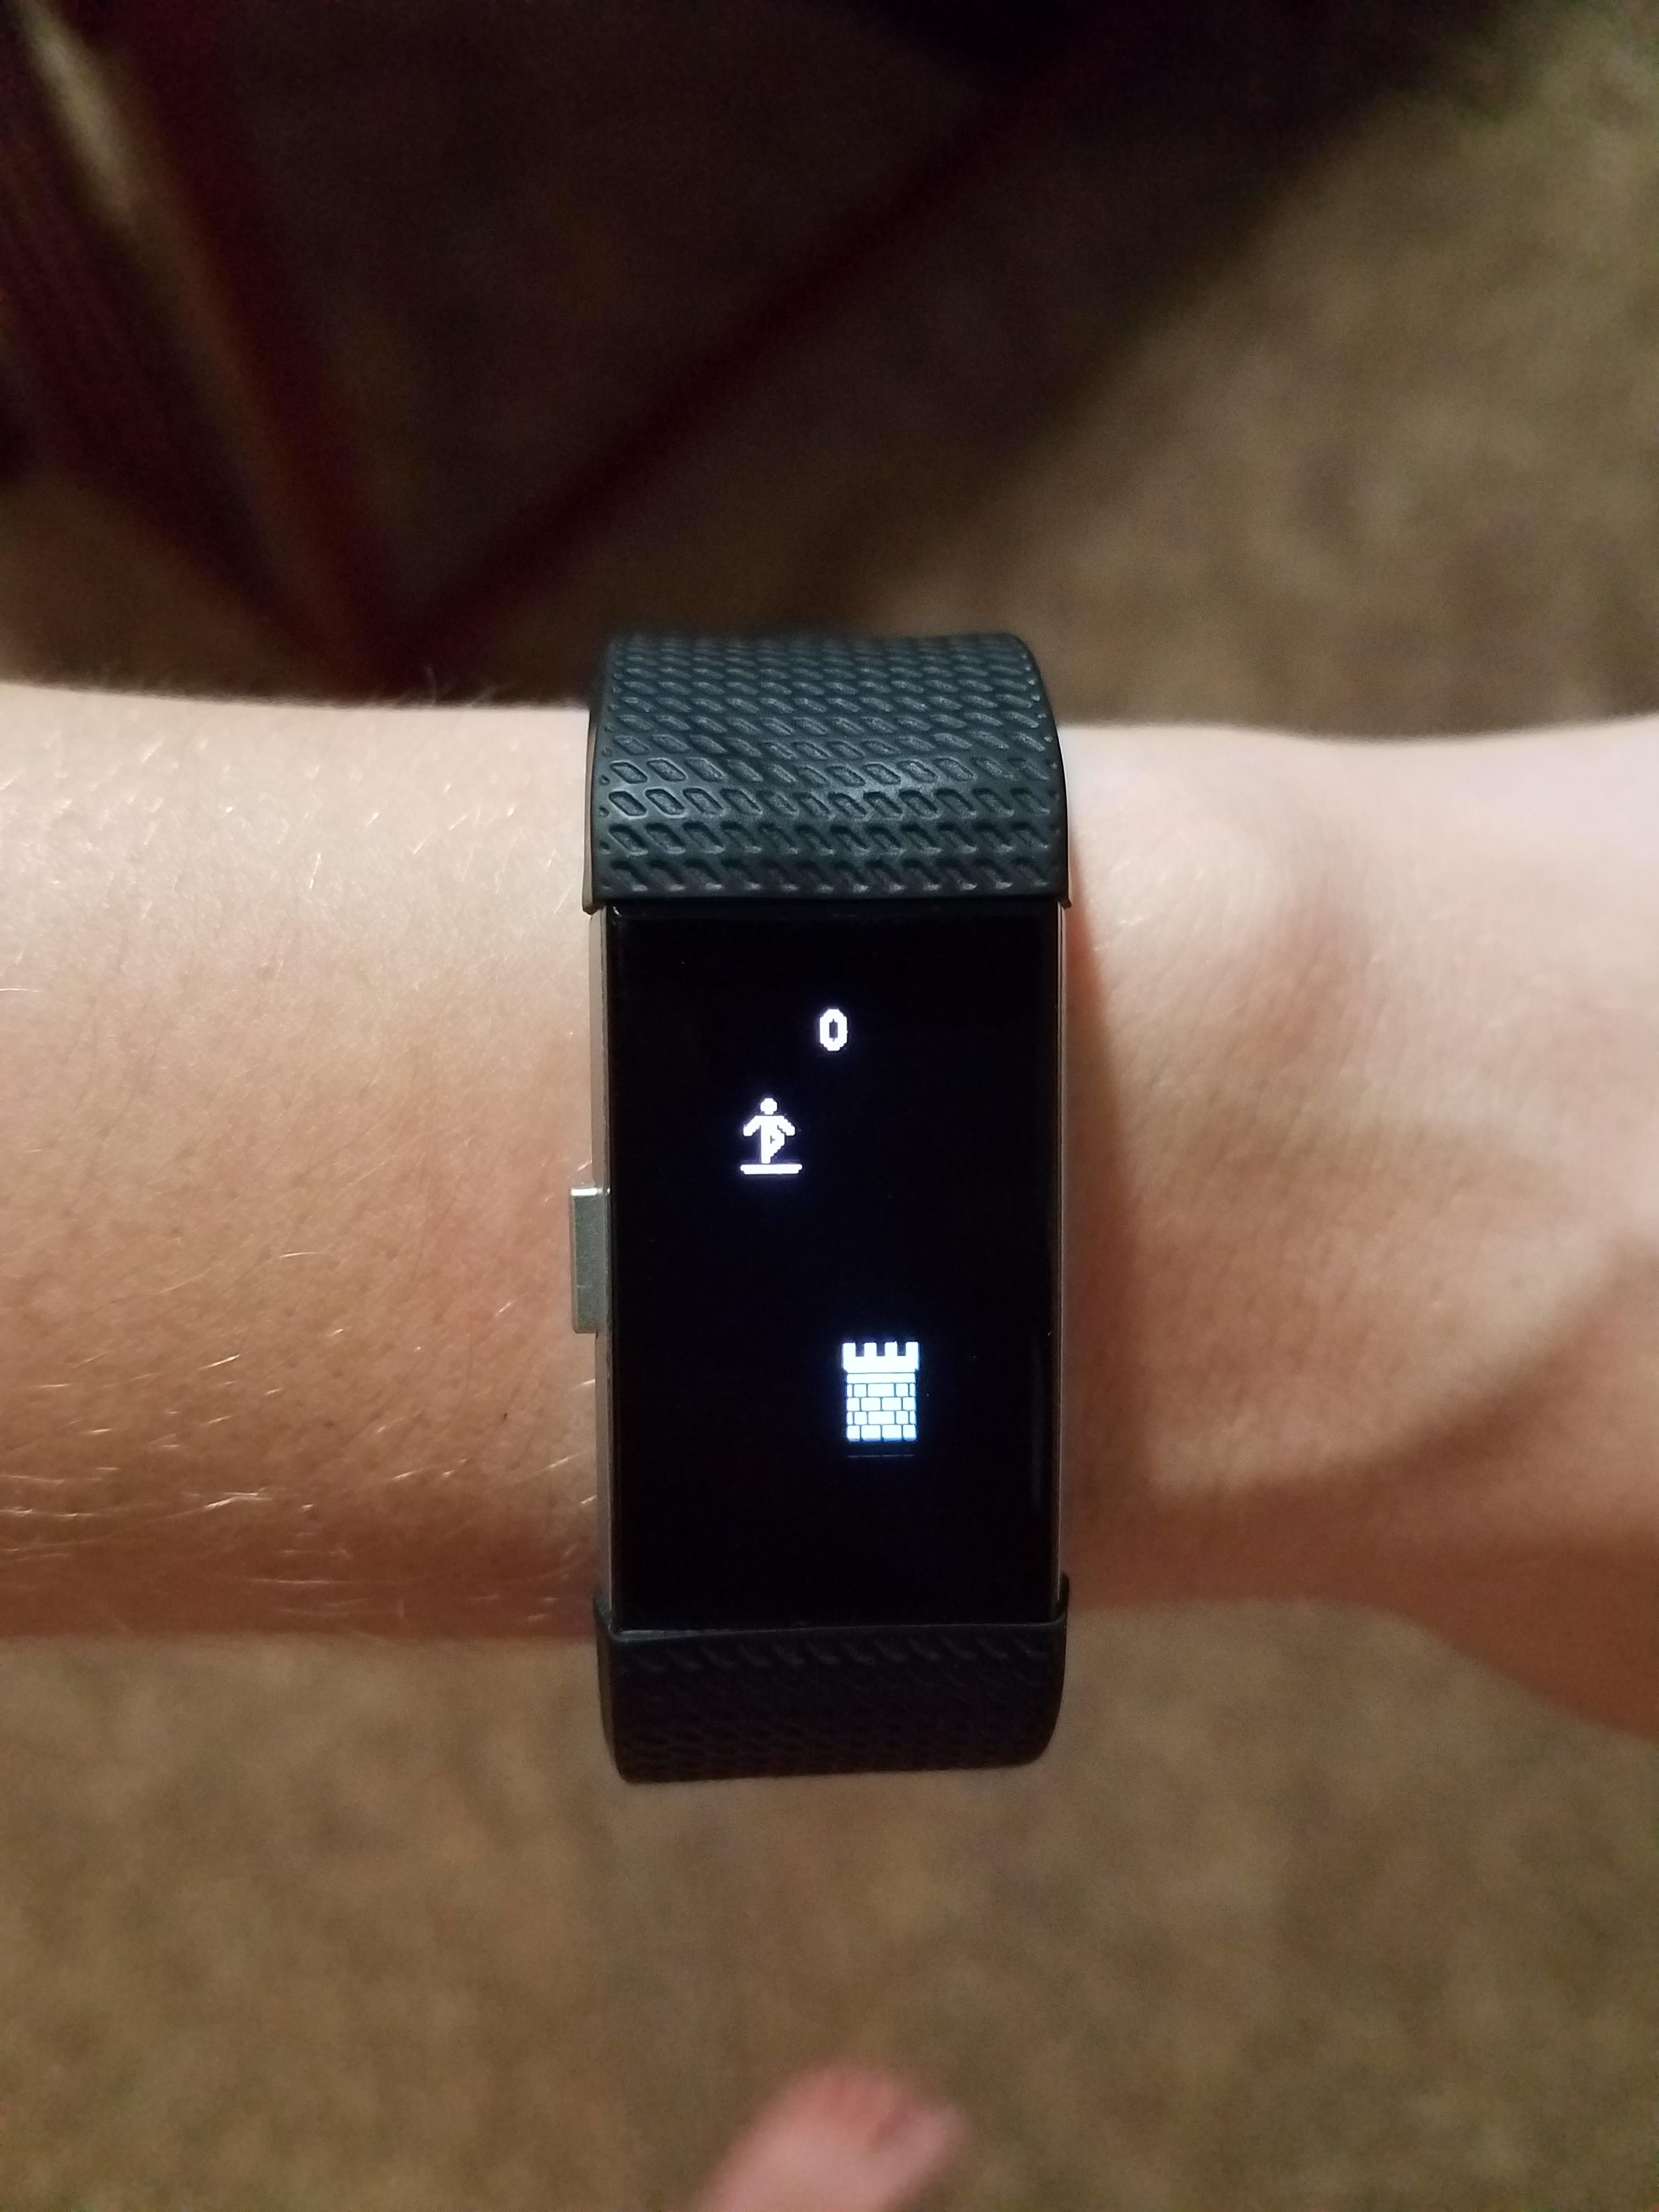 fitbit you can play games on